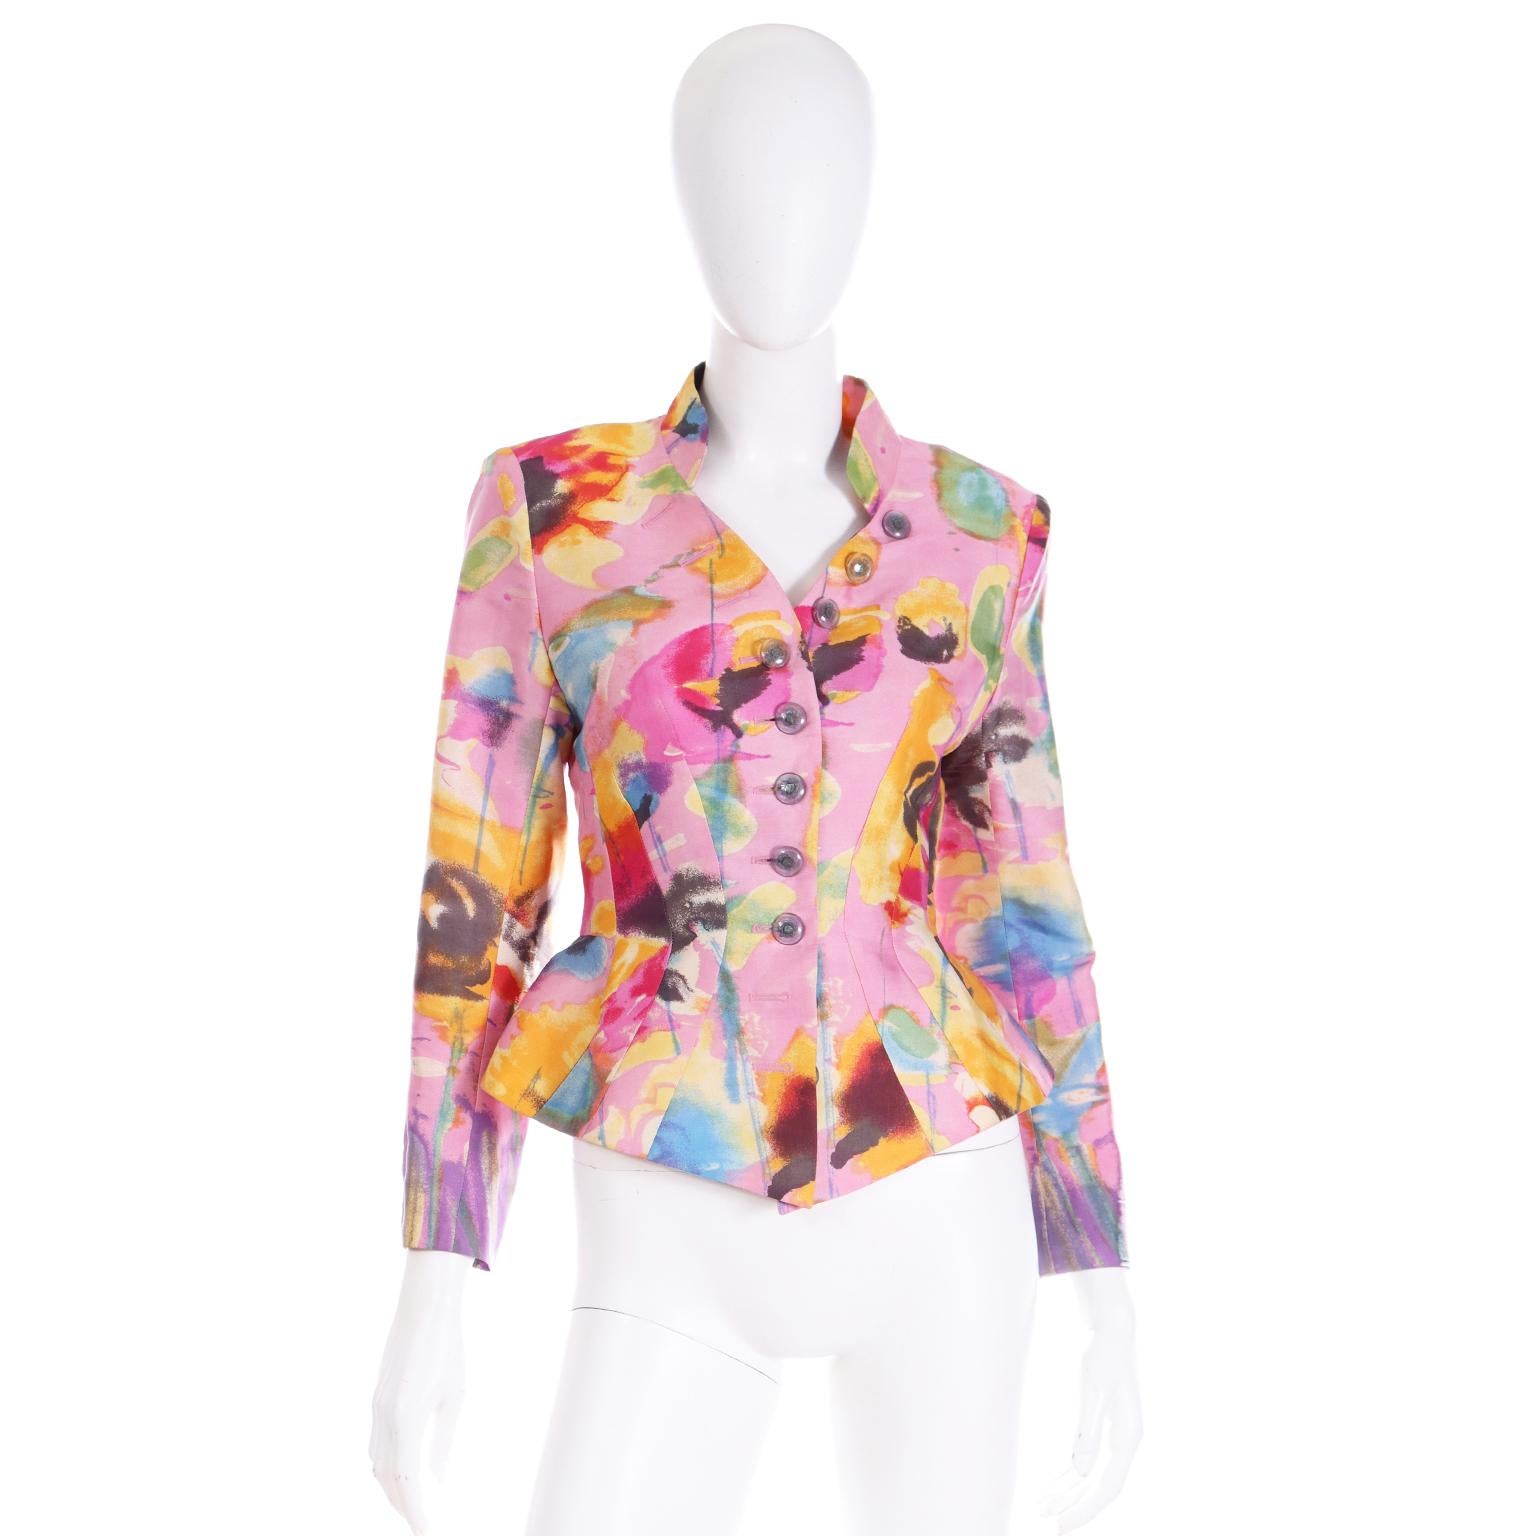 Christian Lacroix 1997 S/S Pink Abstract Print Blazer Jacket Runway Documented In Excellent Condition For Sale In Portland, OR